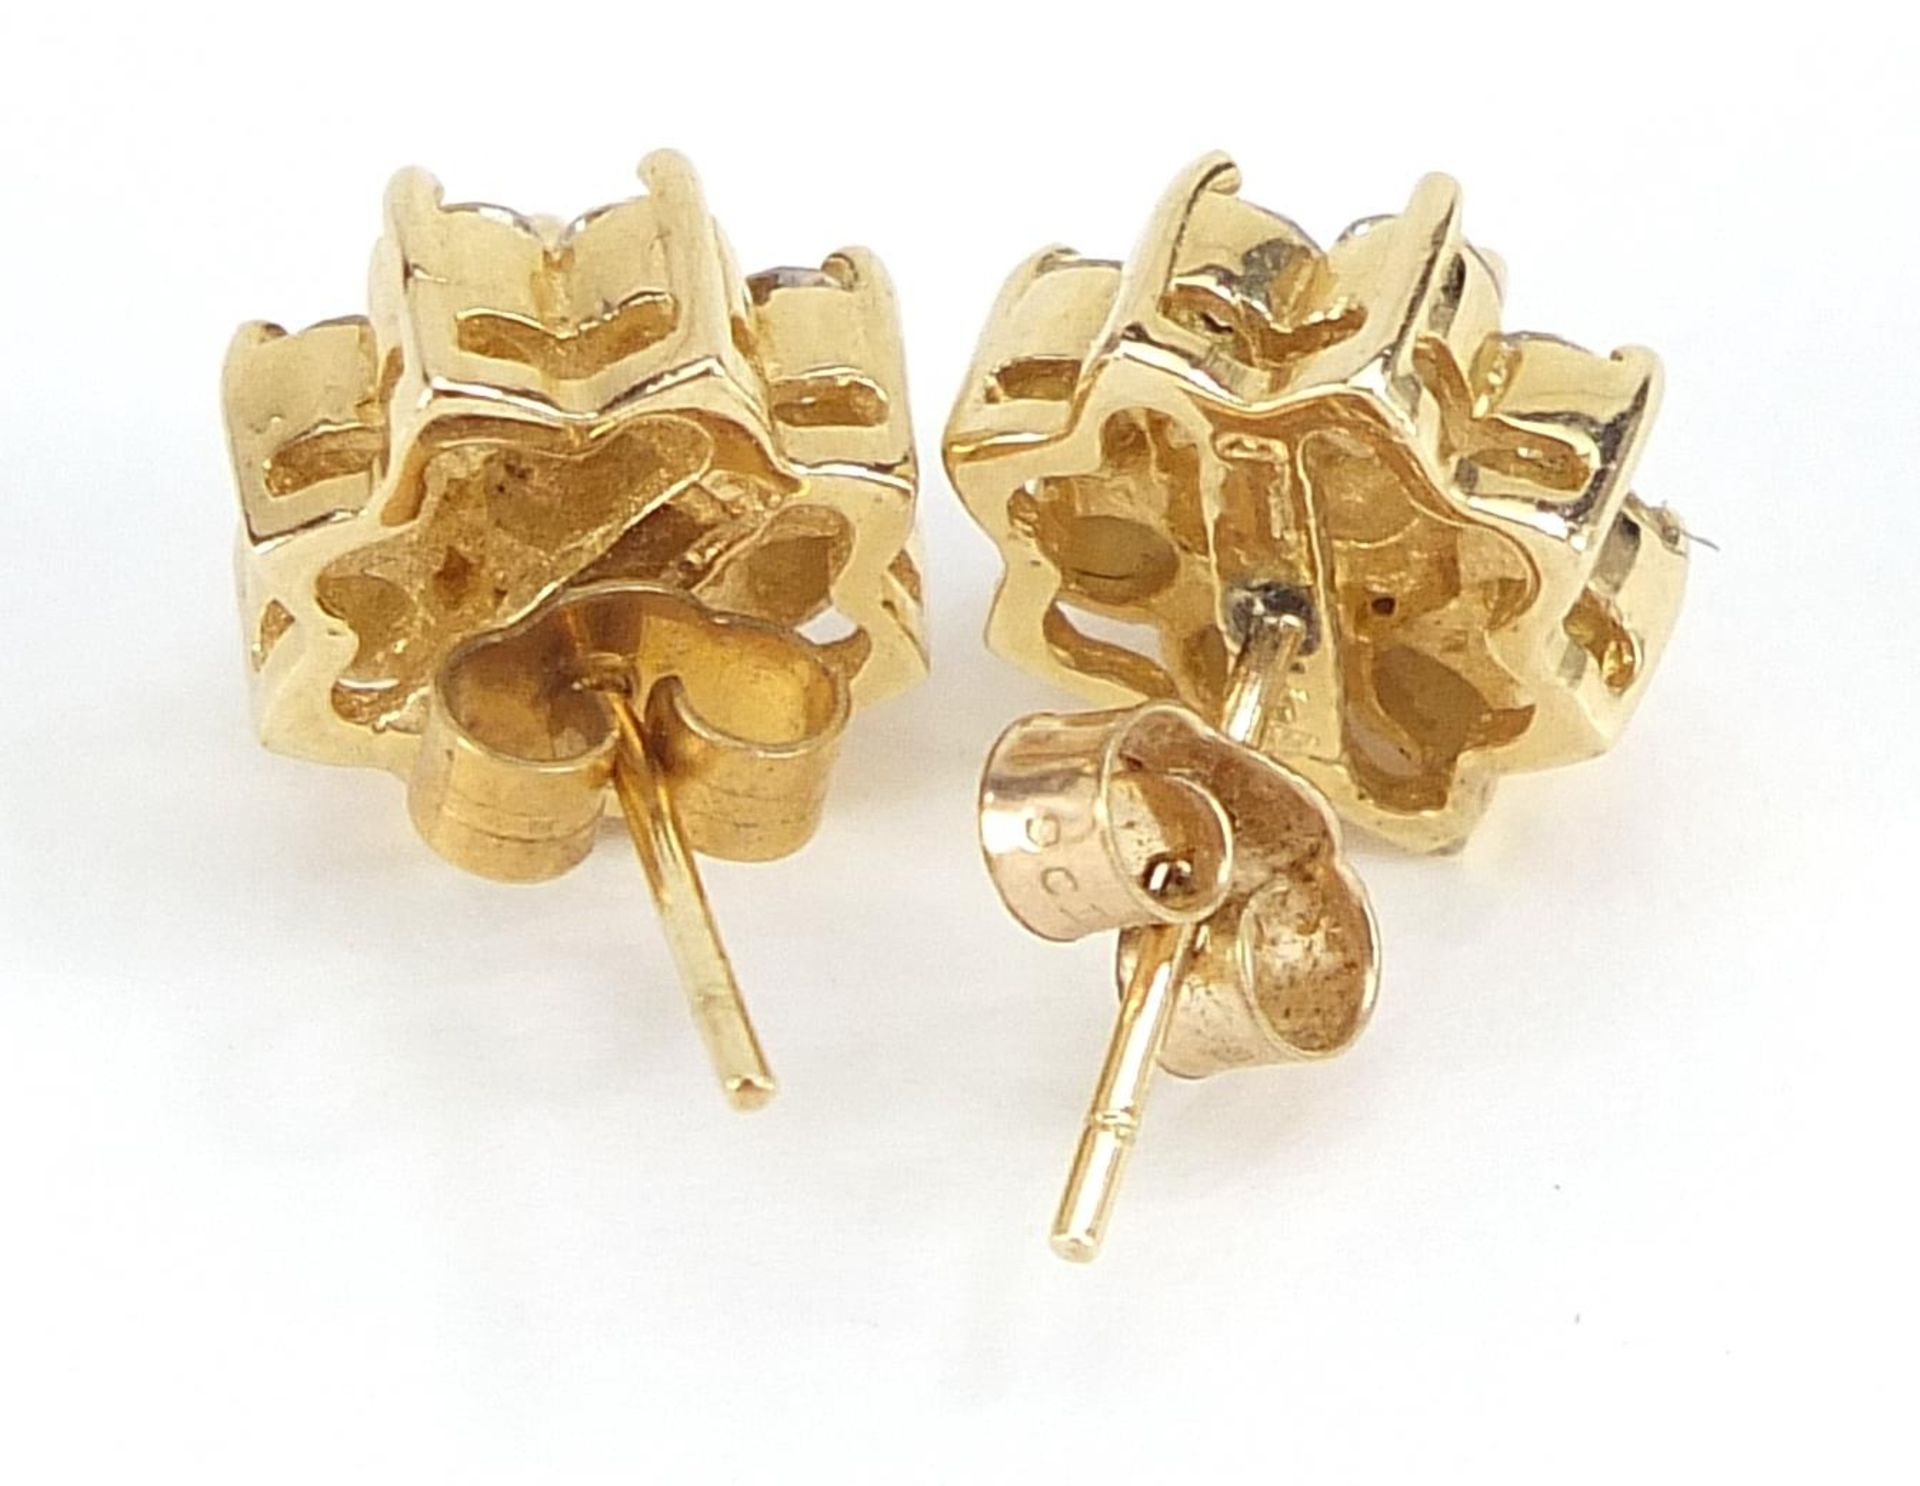 14ct gold diamond flower head stud earrings, the largest diamond approximately 3.7mm in diameter, - Image 2 of 3